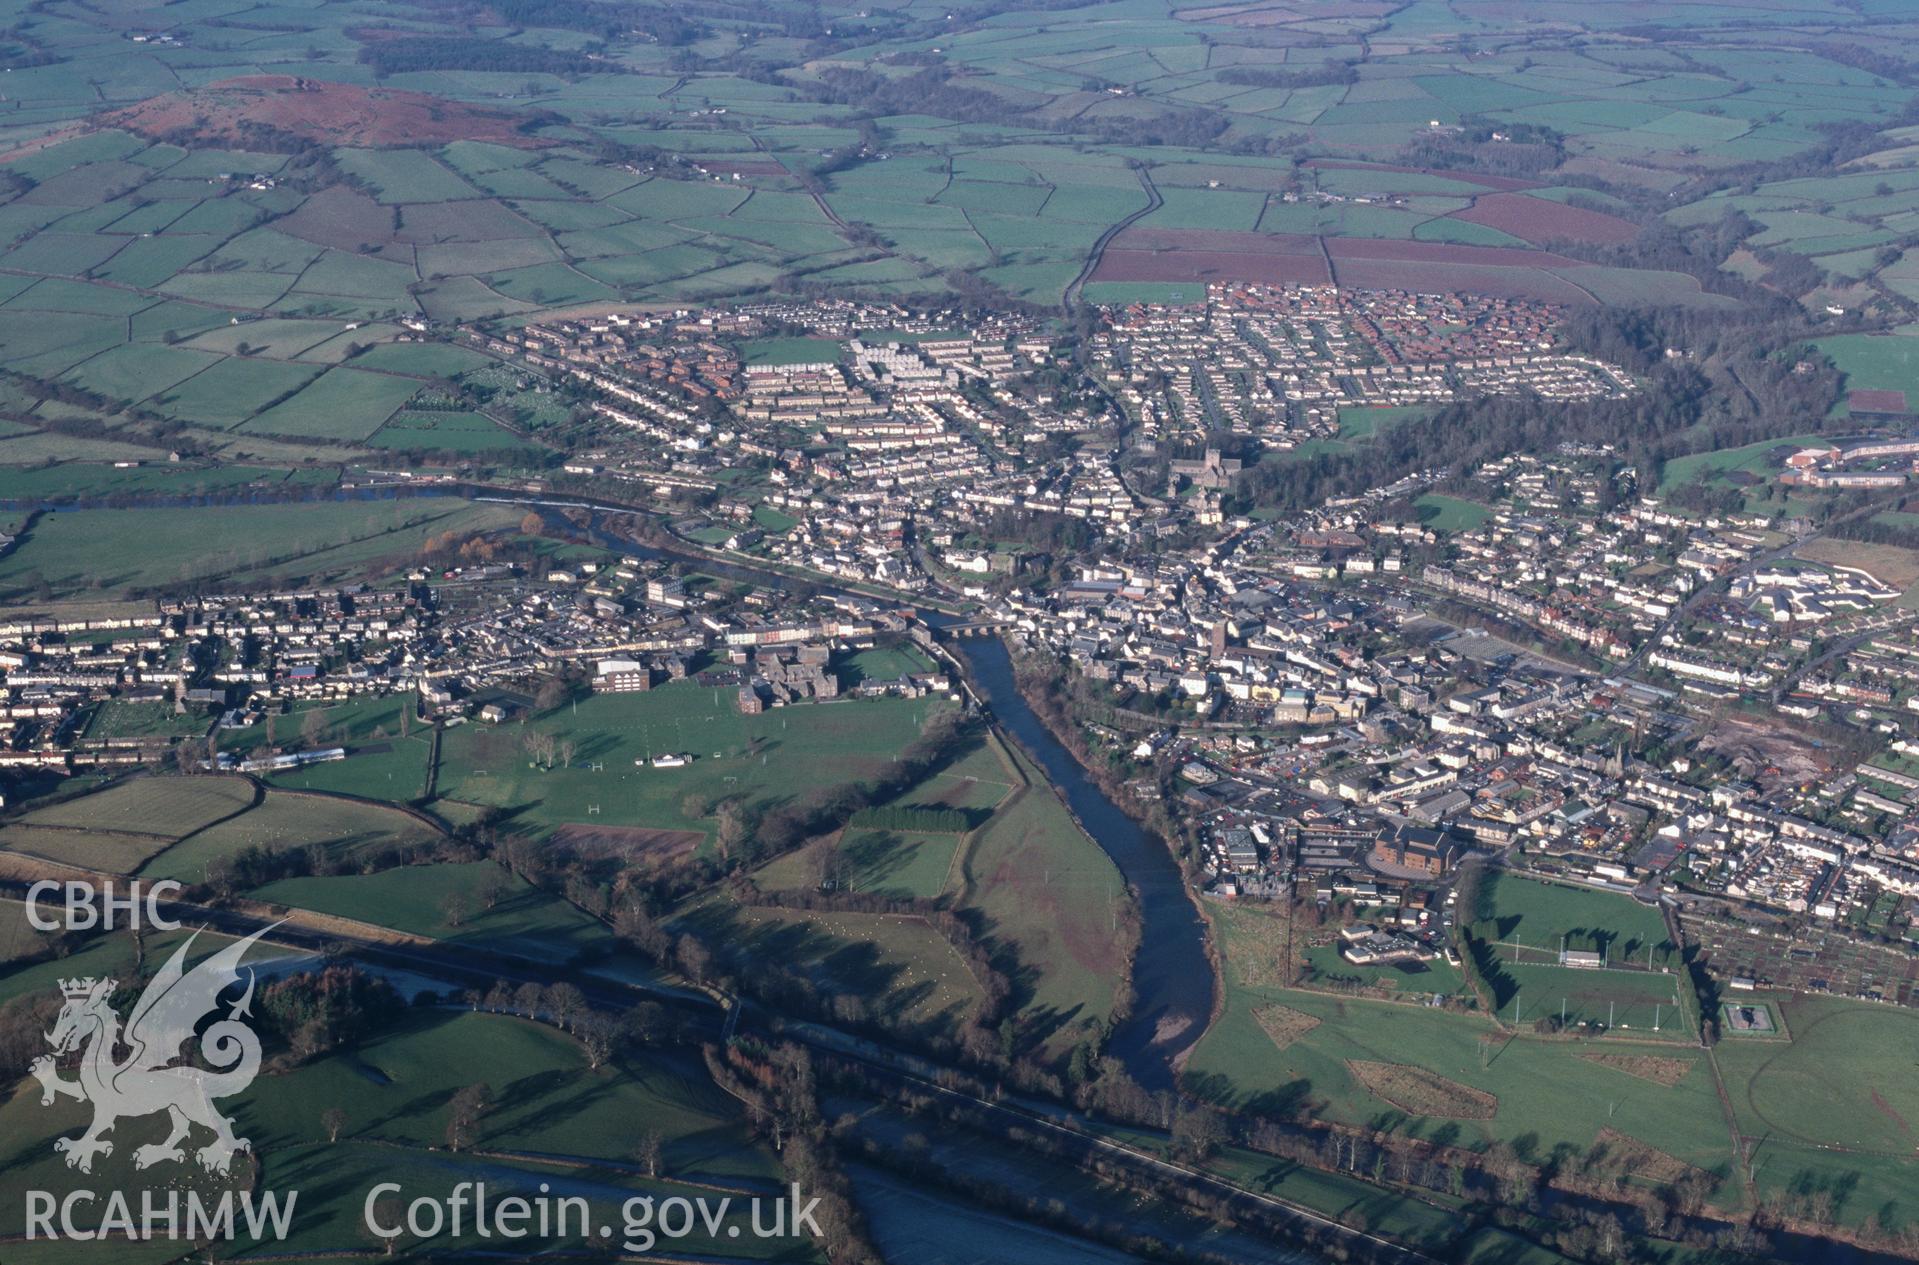 Slide of RCAHMW colour oblique aerial photograph of Brecon, taken by T.G. Driver, 22/1/1999.